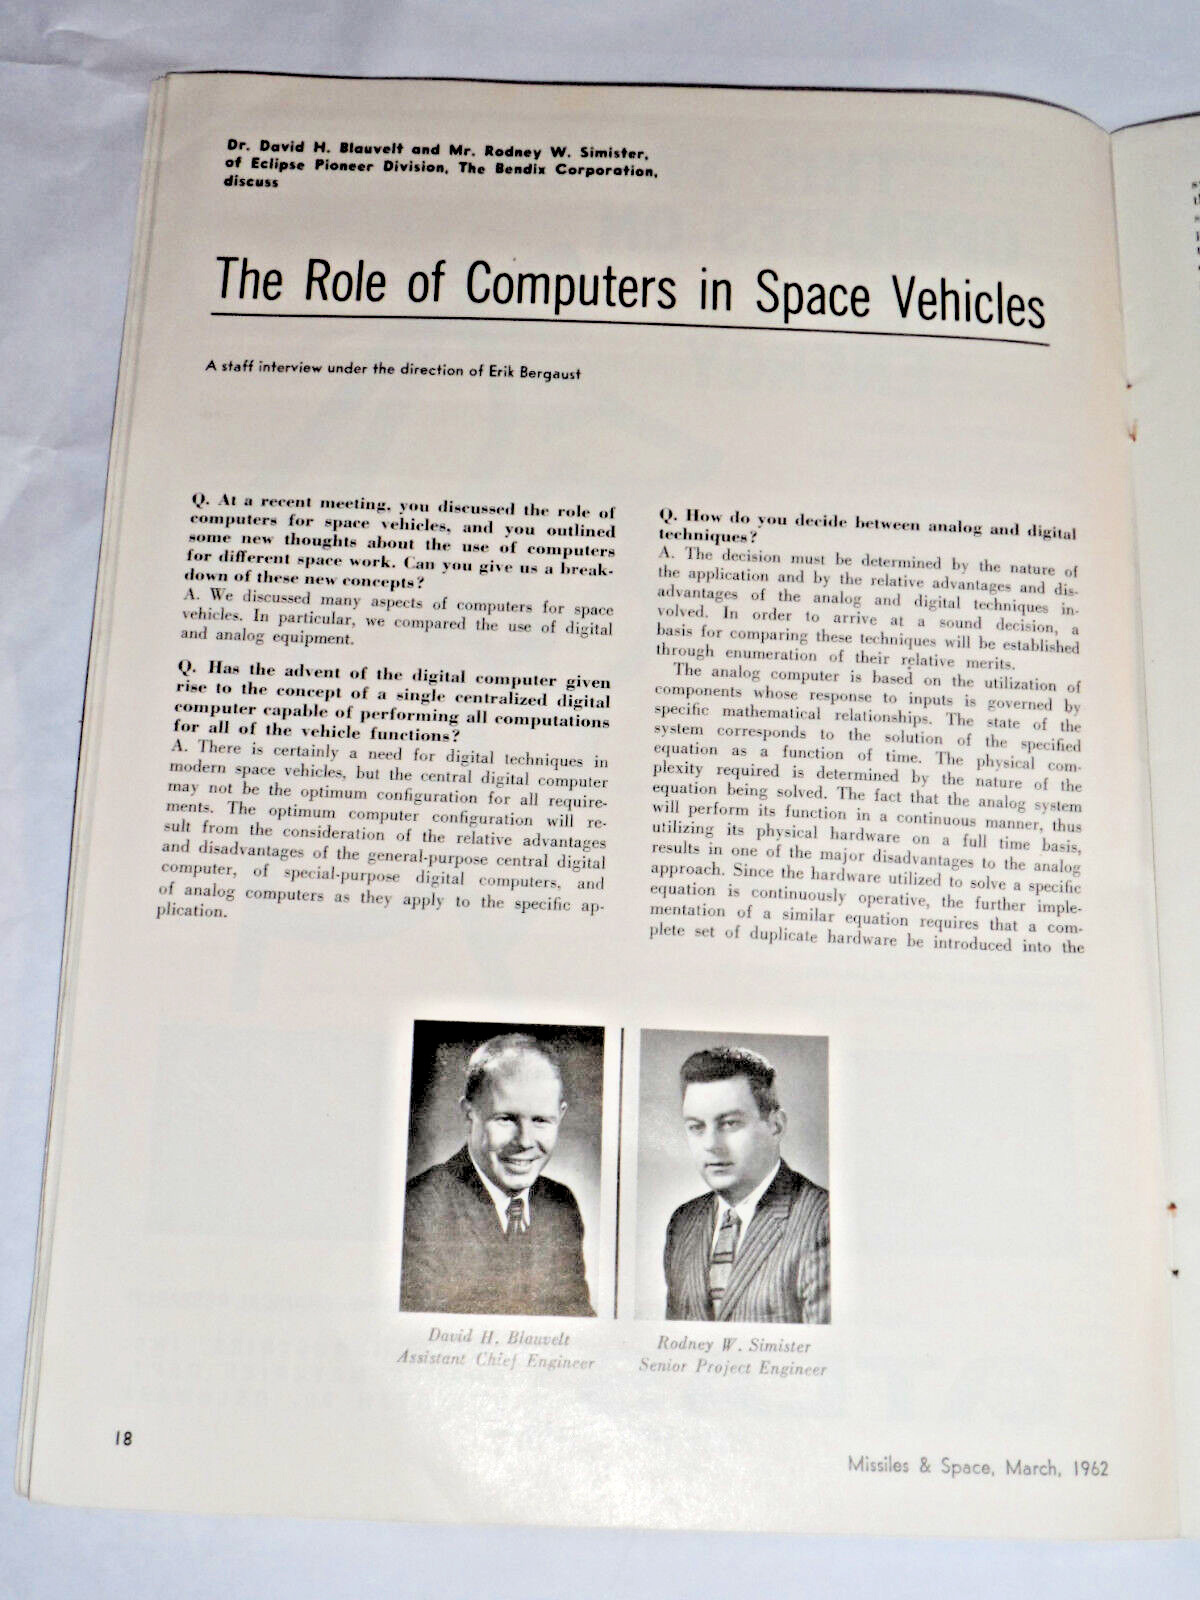 VINTAGE 1962 MISSILES & SPACE TRADE MAGAZINE/ROLE OF COMPUTERS IN SPACE VEHICLES